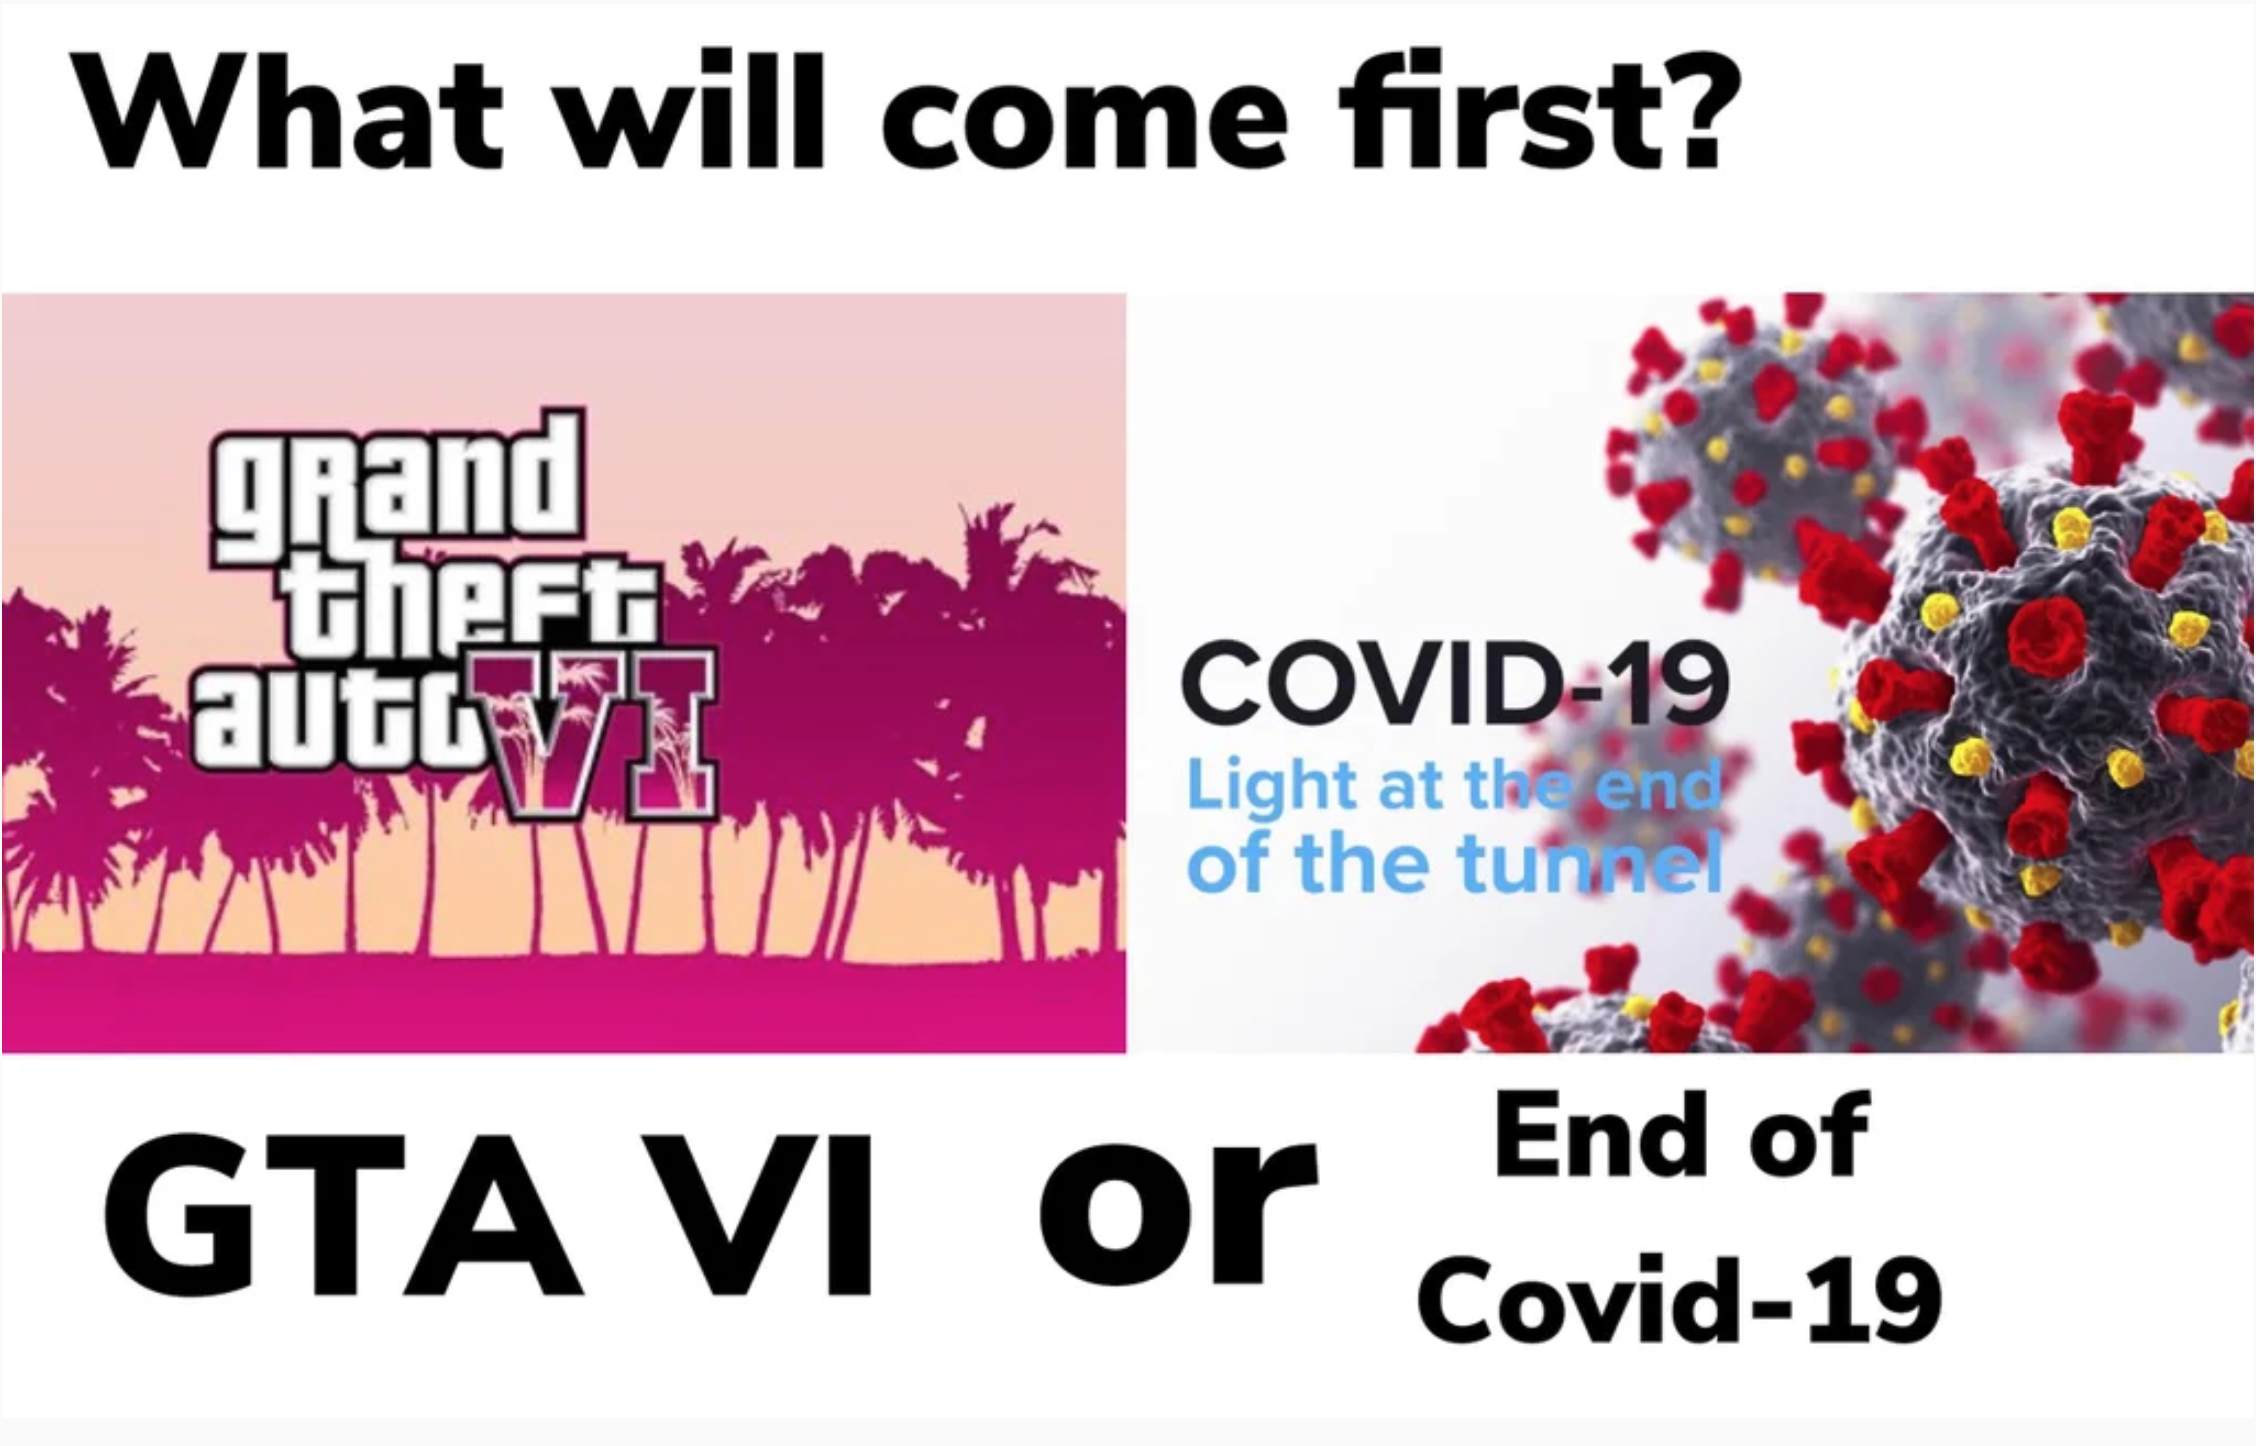 funny gaming memes - gta 4 - What will come first? grand theft auty Covid19 Light at the end of the tunnel Gta Vi or End of Covid19